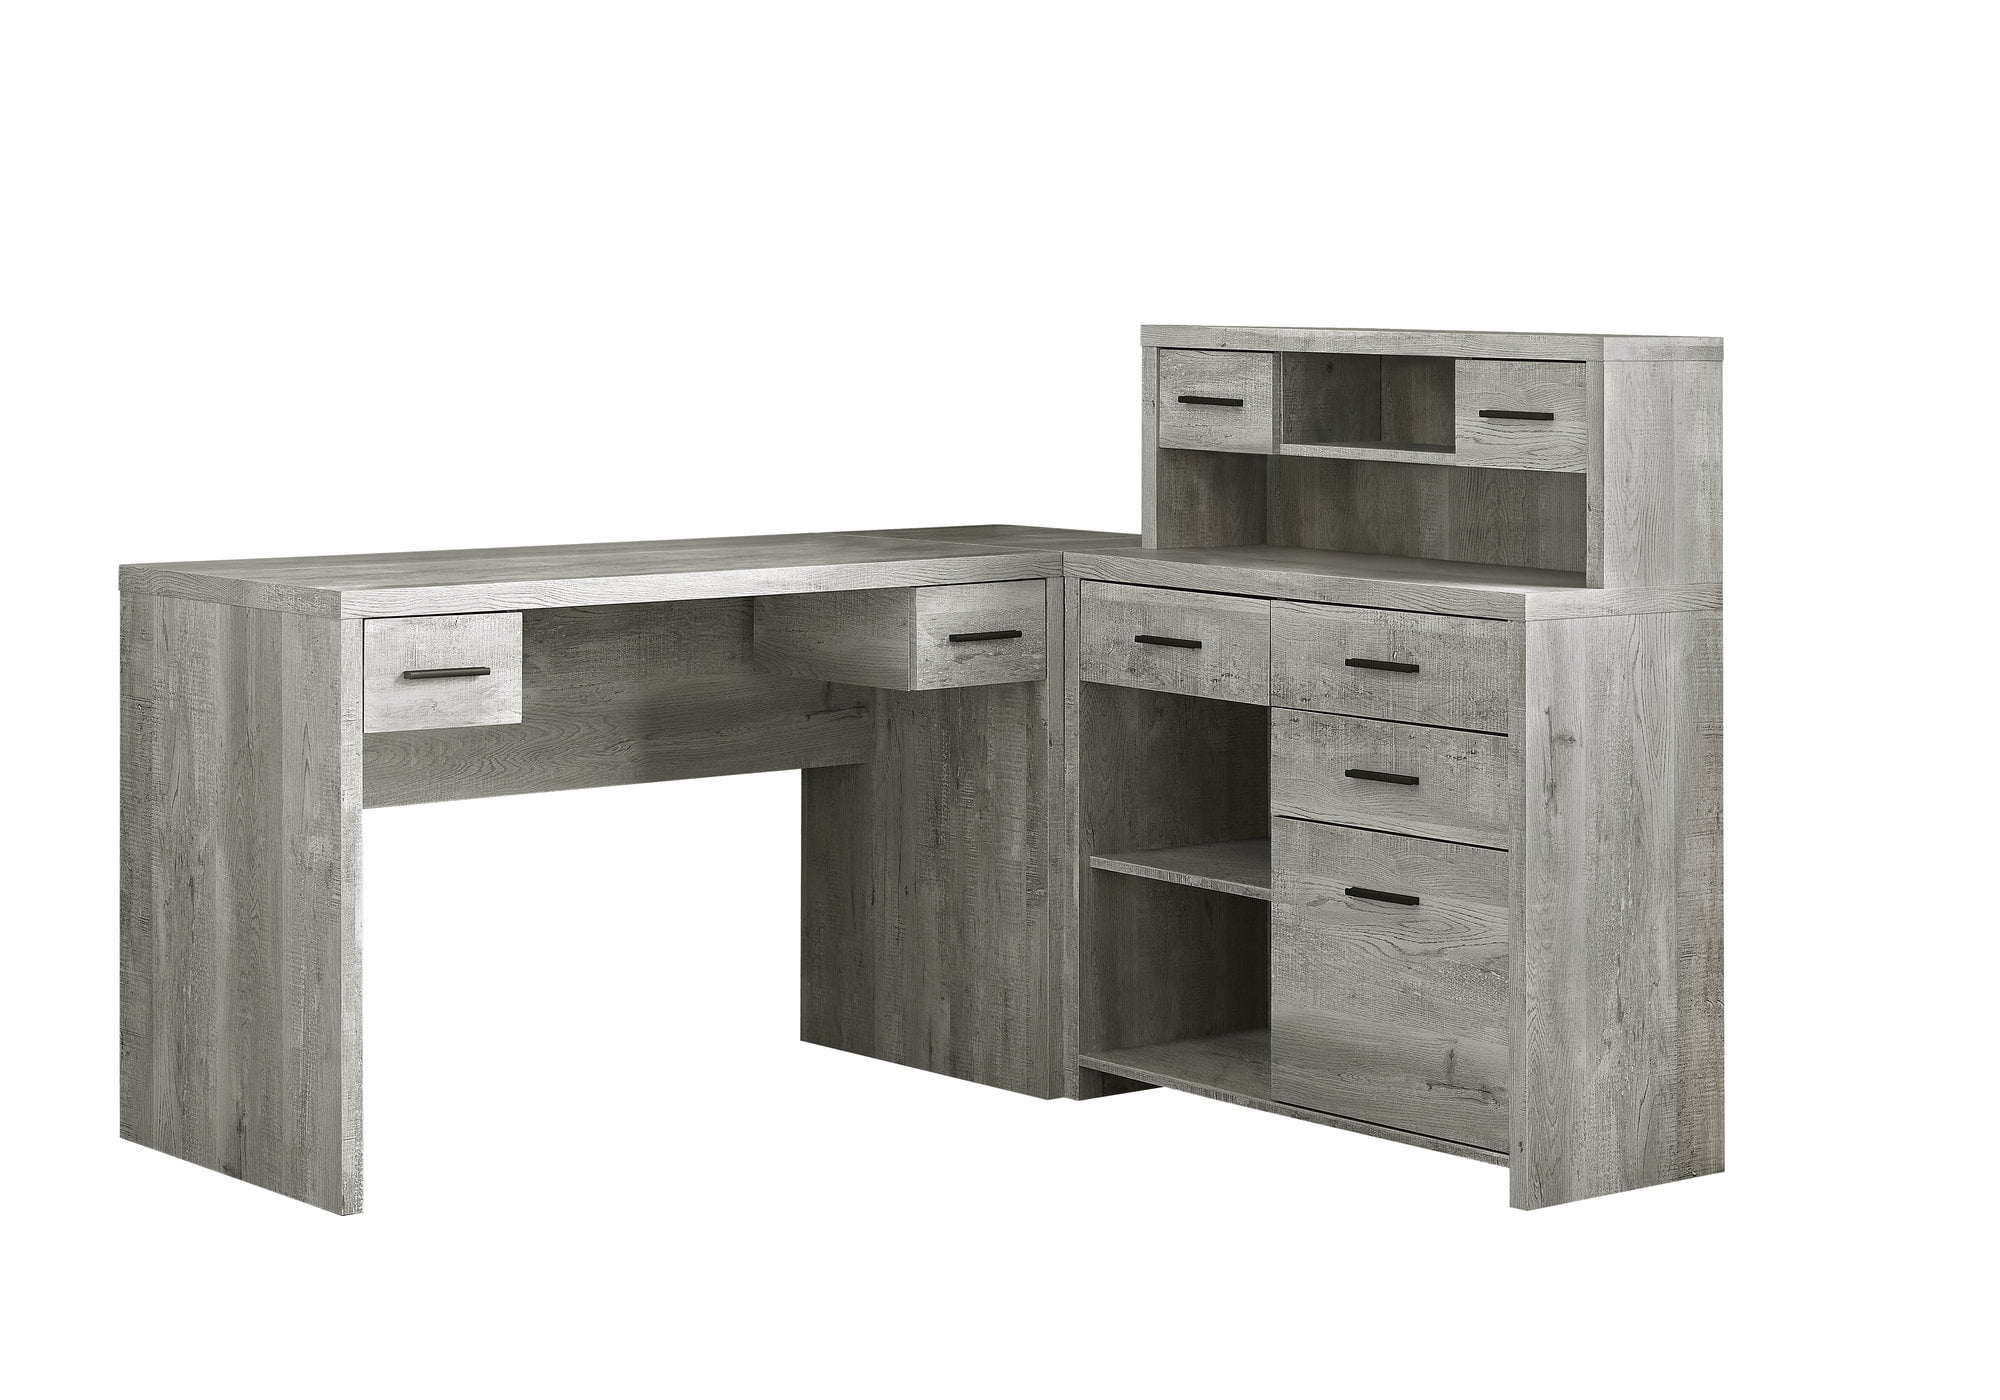 Featured image of post Grey Wood Desk With Drawers - Blue/ grey drawers distressed, clear coat outer.